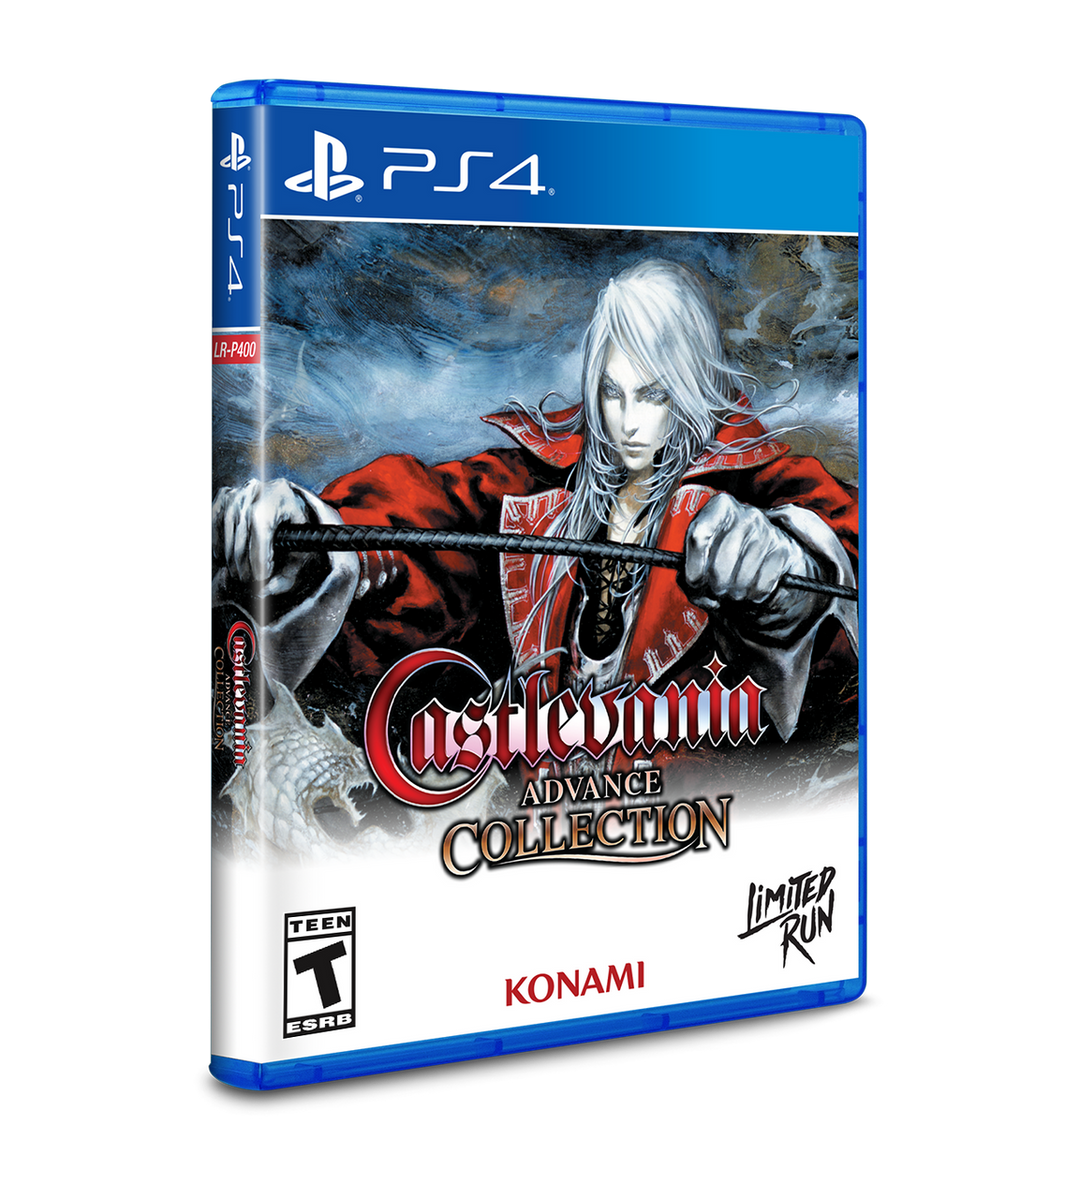 NEW Castlevania Advance Collection (Limited Run) (Harmony of Dissonance Cover) Playstation 4 PS4